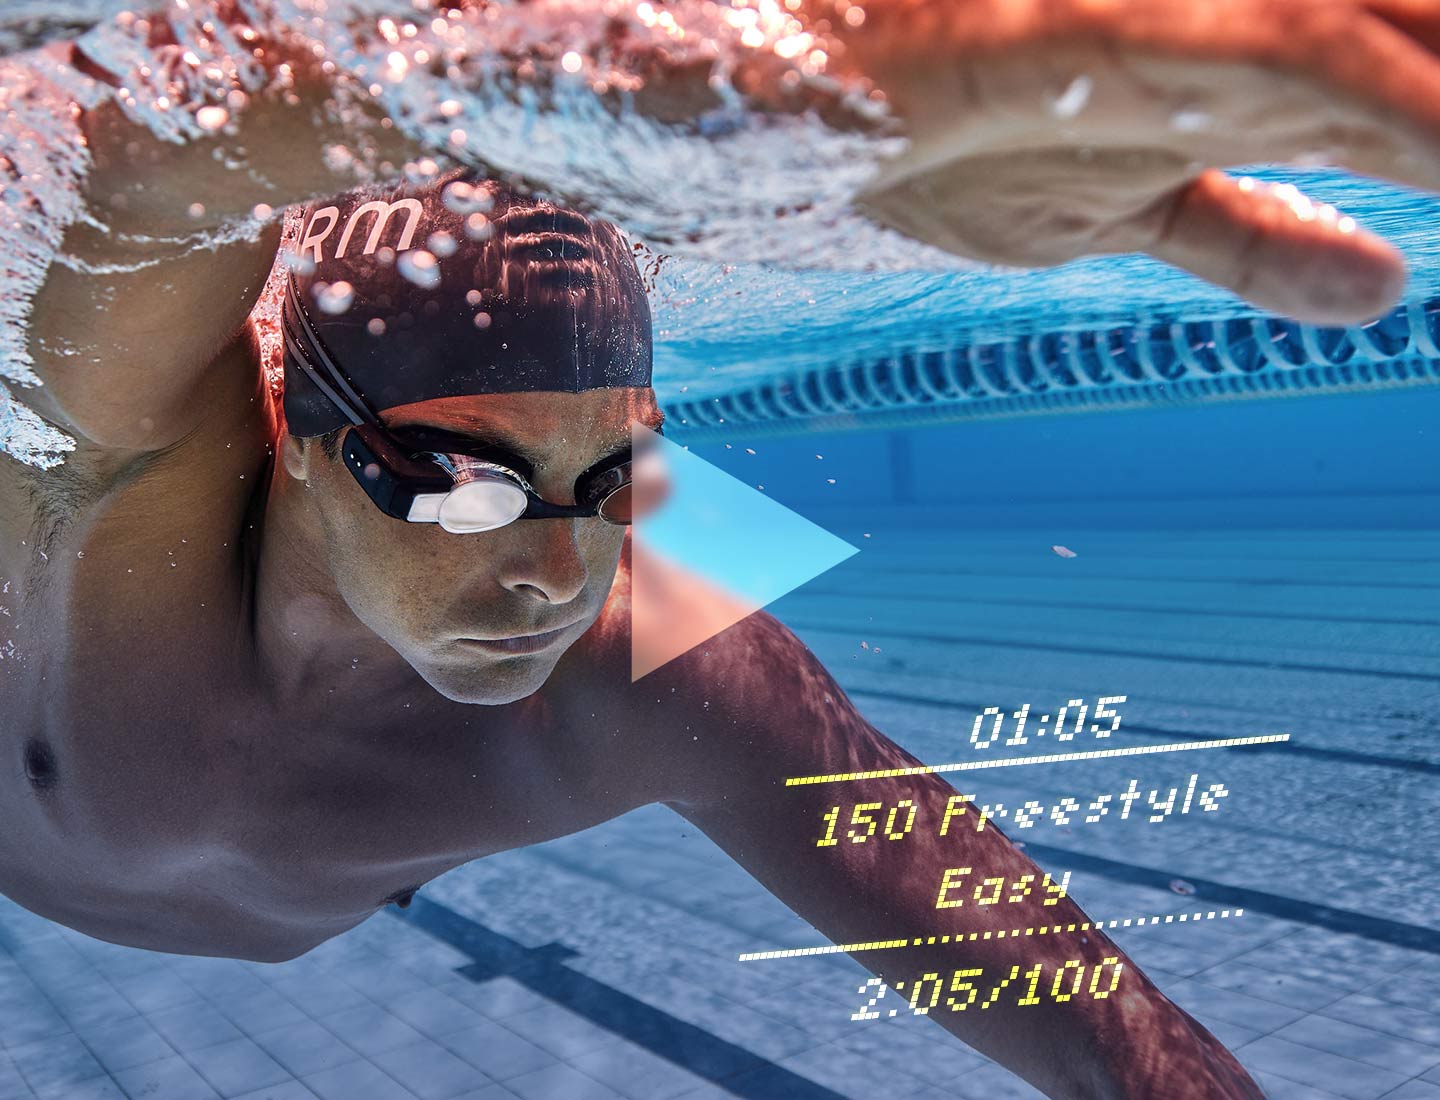 A swimmer wearing Form swim goggles with the in-goggle display showing the intensity of workout, time, and pace in real-time